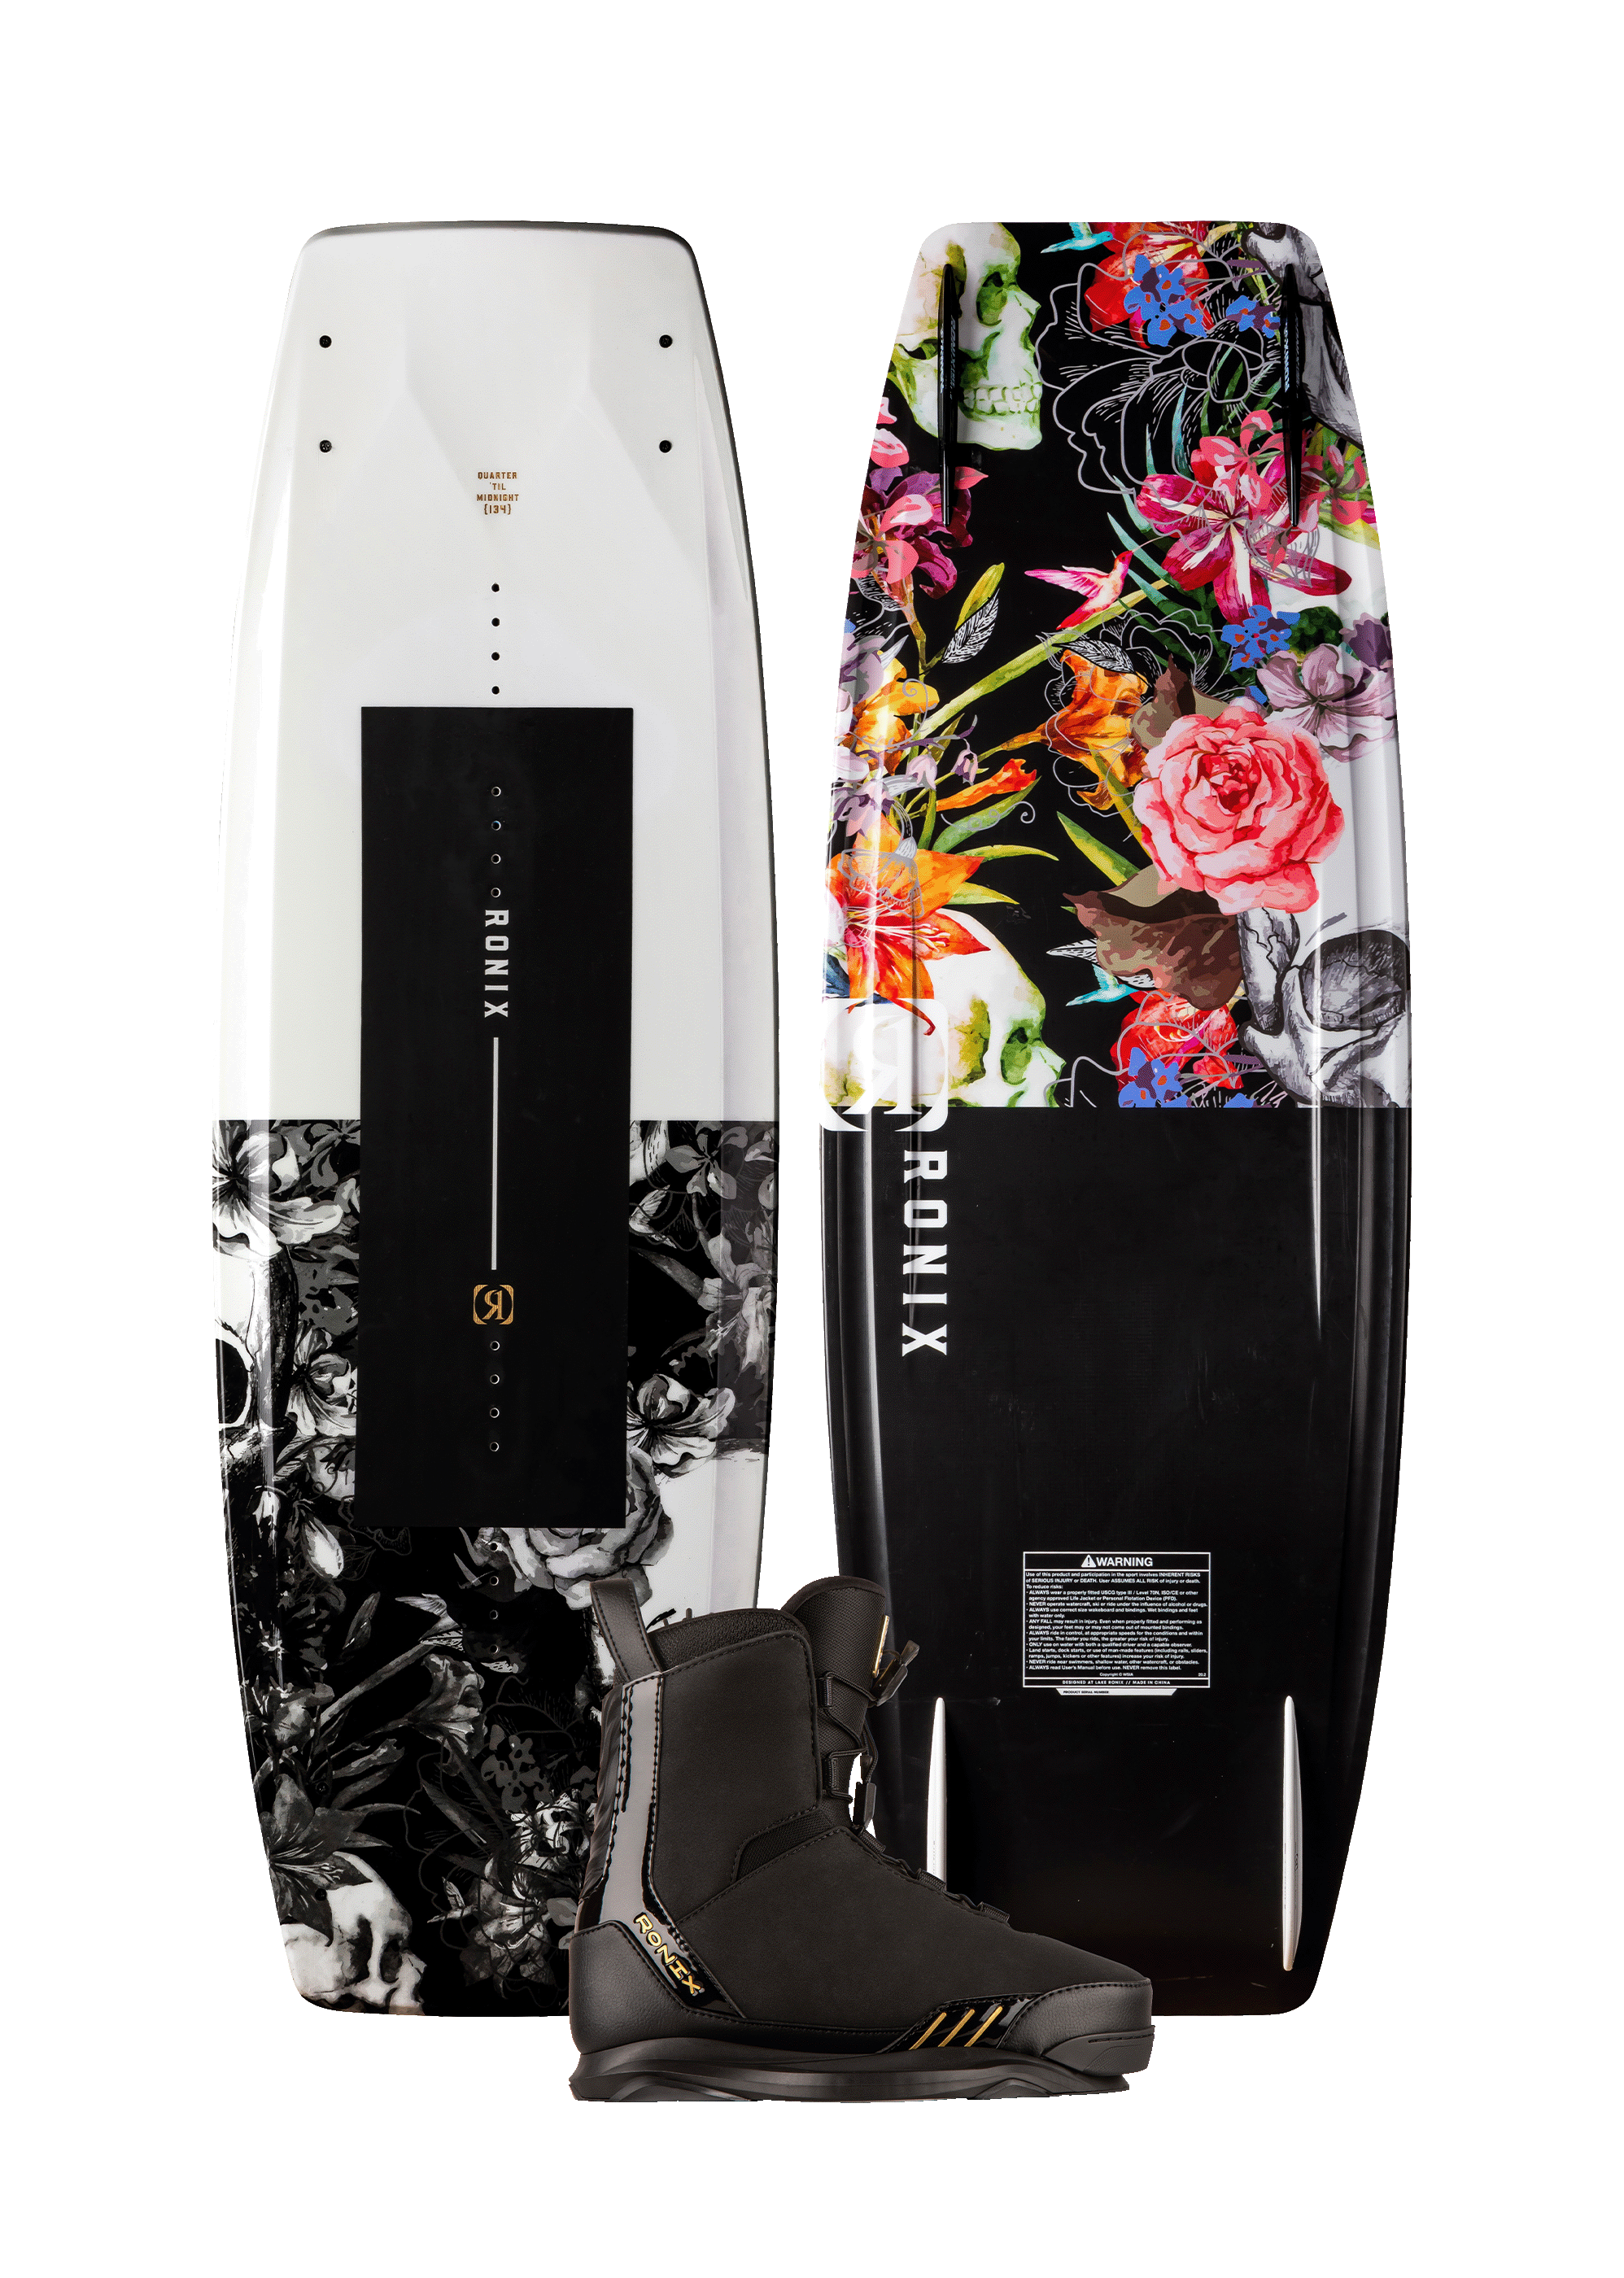 RONIX QUARTER 'TIL MIDNIGHT WITH RISE PACKAGE